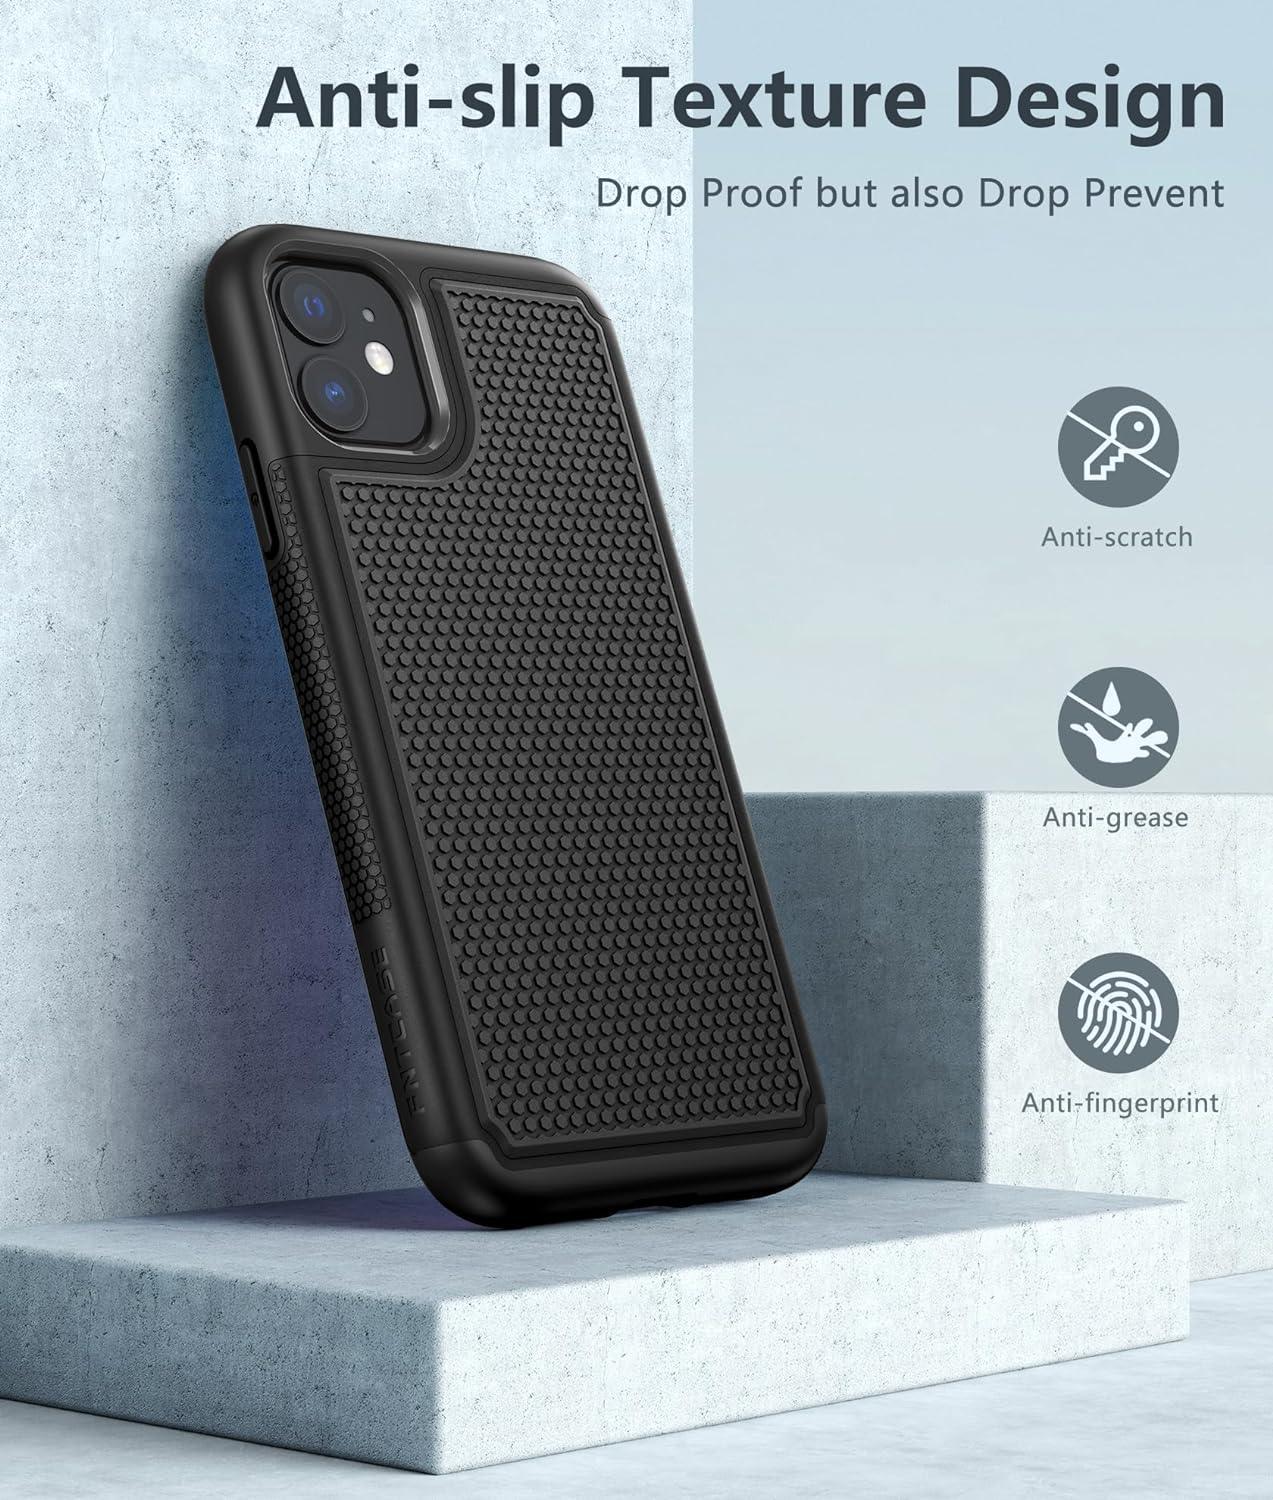 iPhone 11 Phone Case: Dual Layer Heavy Duty Protective Cover Shockproof Rugged with Non-Slip Textured - FNTCASE OFFICIAL